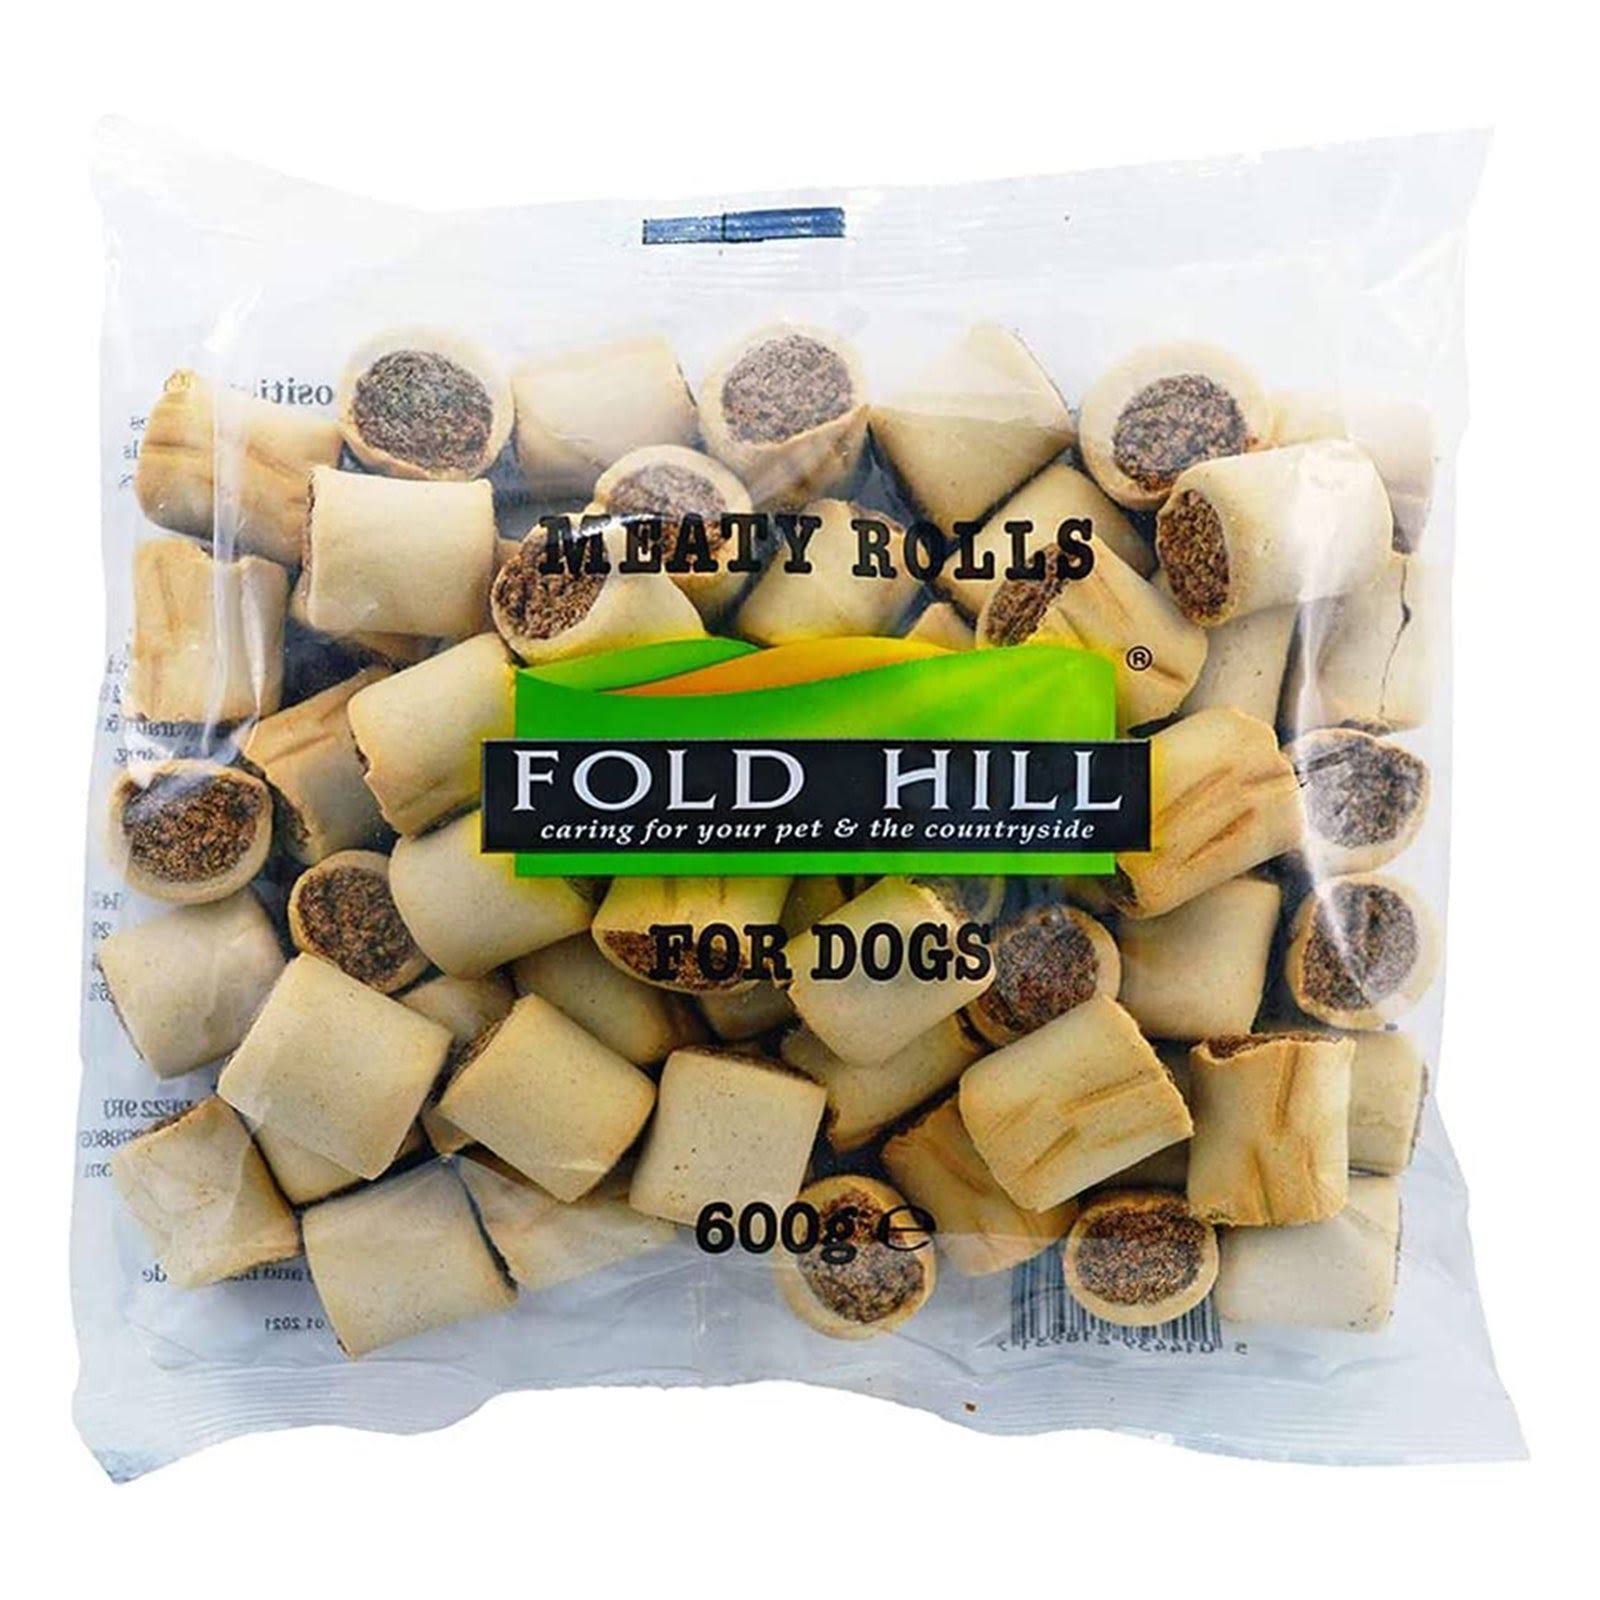 Fold Hill Meaty Rolls For Dogs 600g